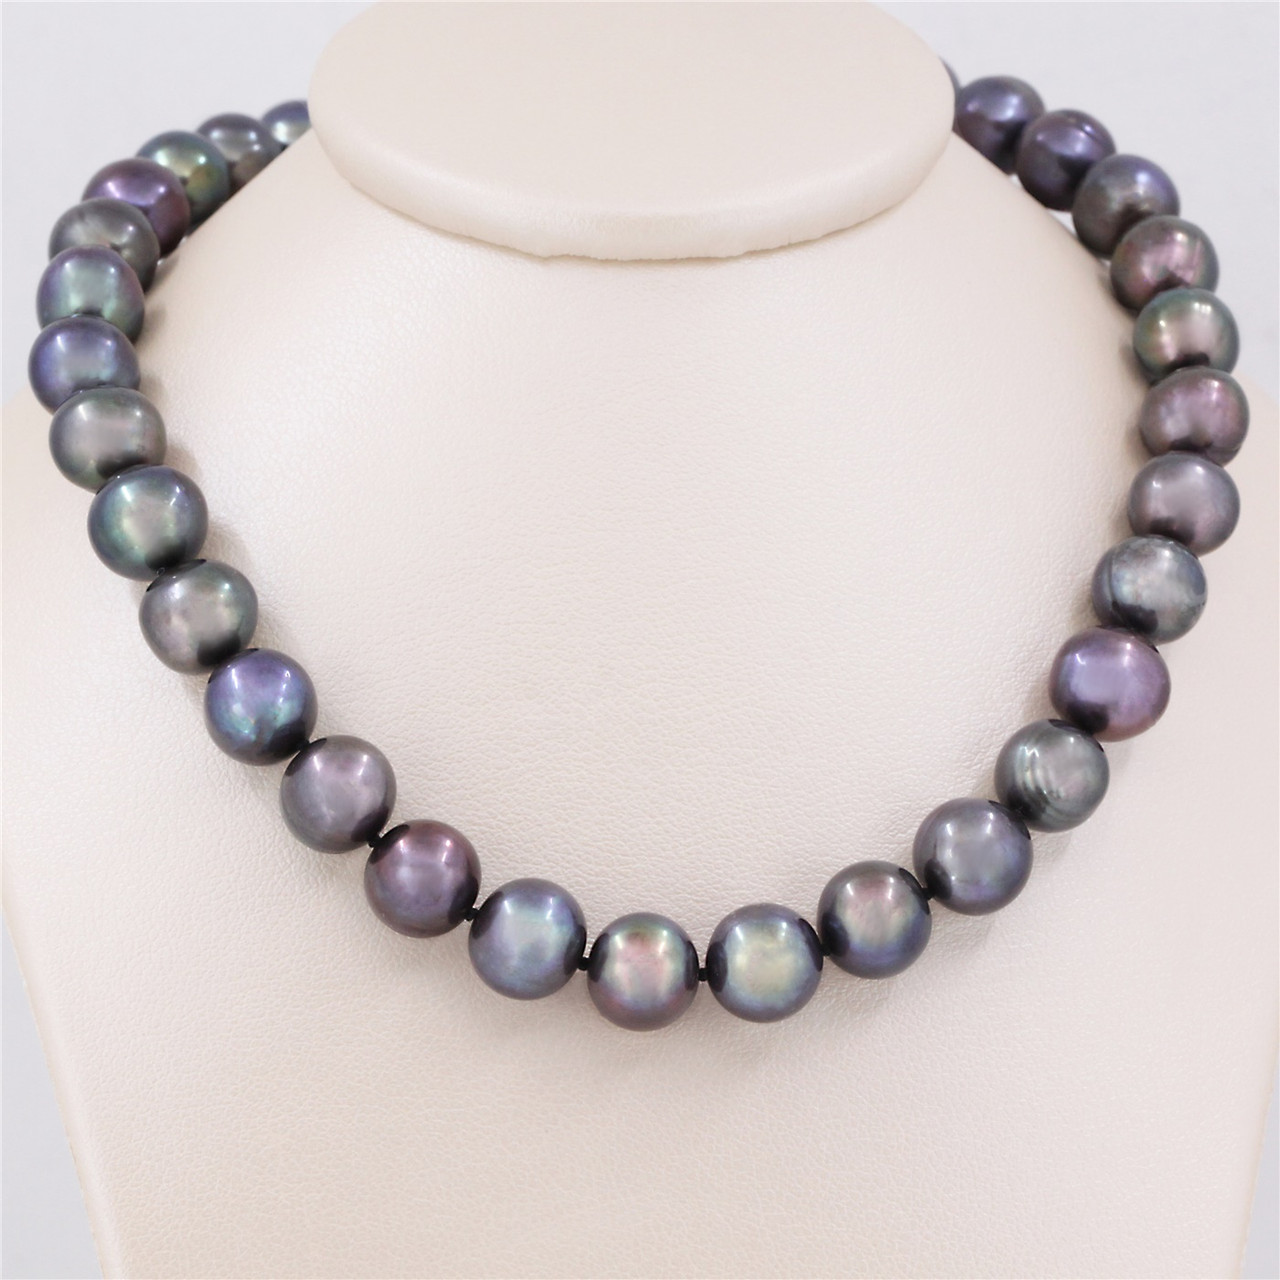 When and How to Wear Your Black Pearl Necklace - PearlsOnly :: PearlsOnly |  Save up to 80% with Pearls Only France